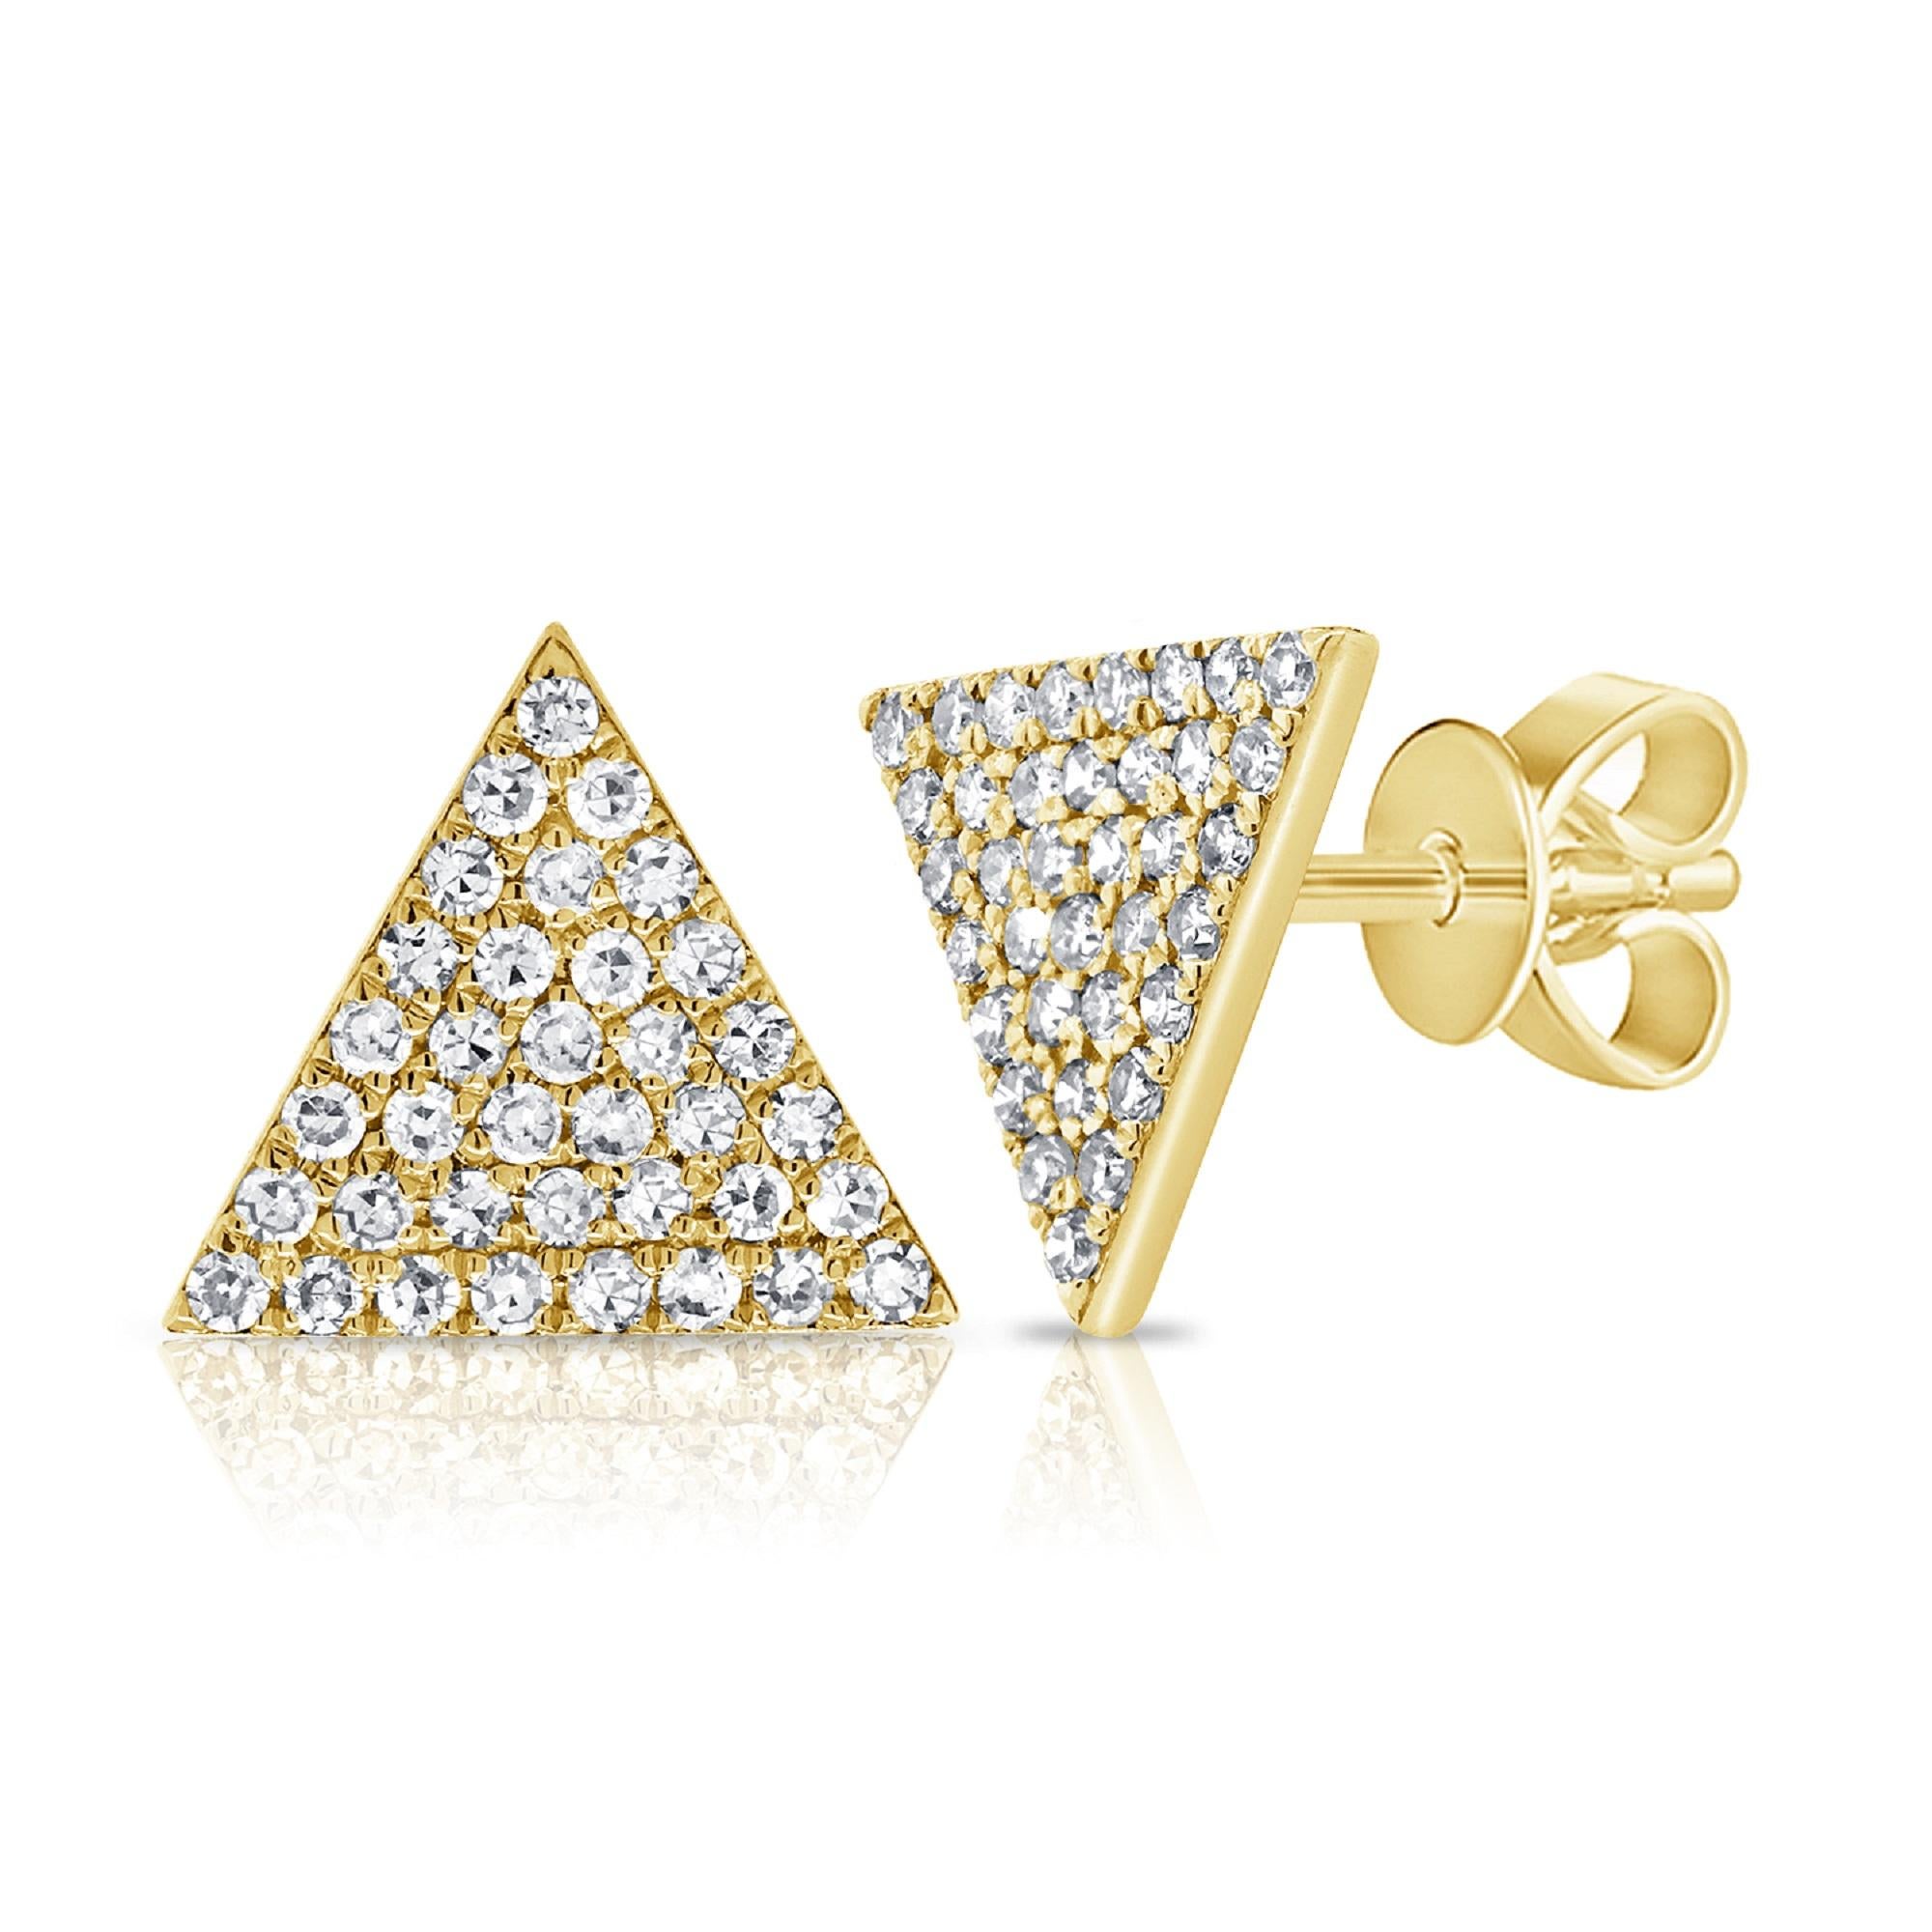 Contemporary 14K Yellow Gold Diamond Triangle Stud Earrings For Sale